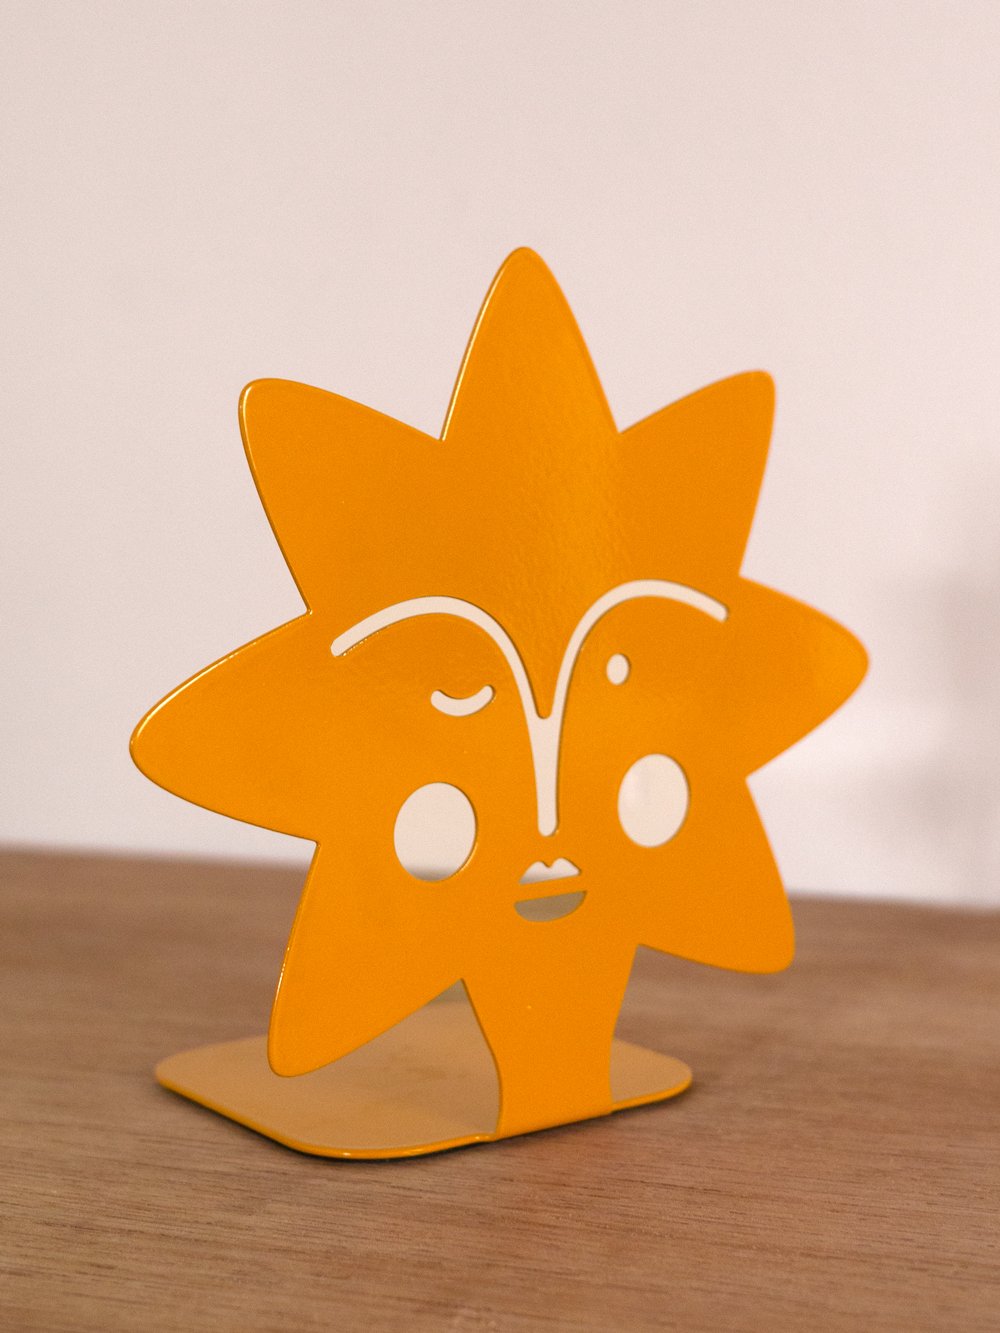 Image of sun shaped bookend